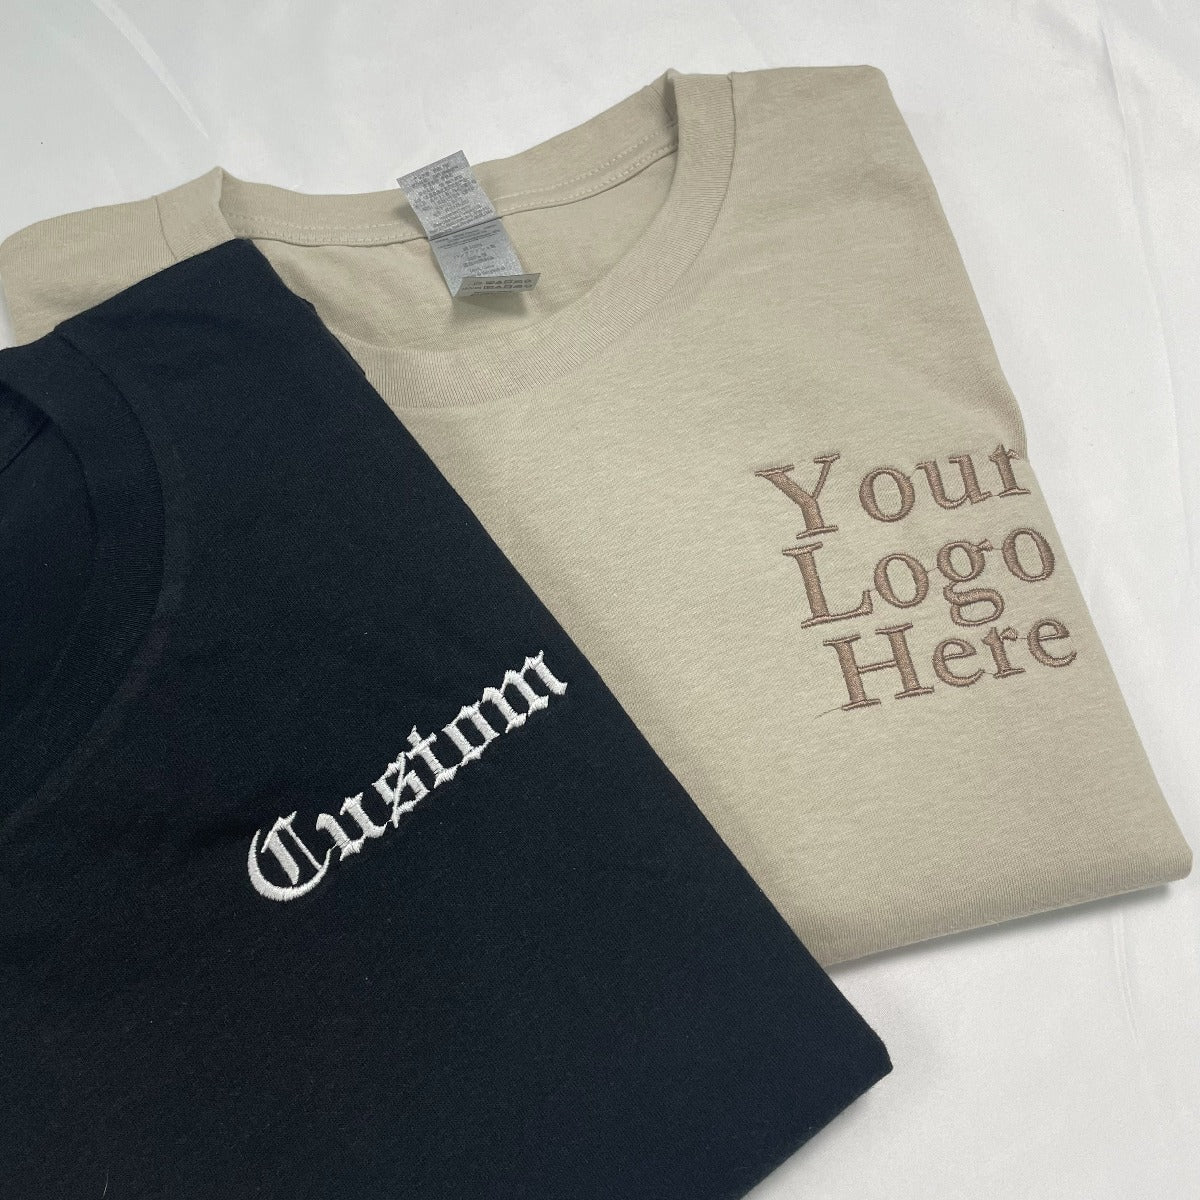 logo embroidered T-shirt